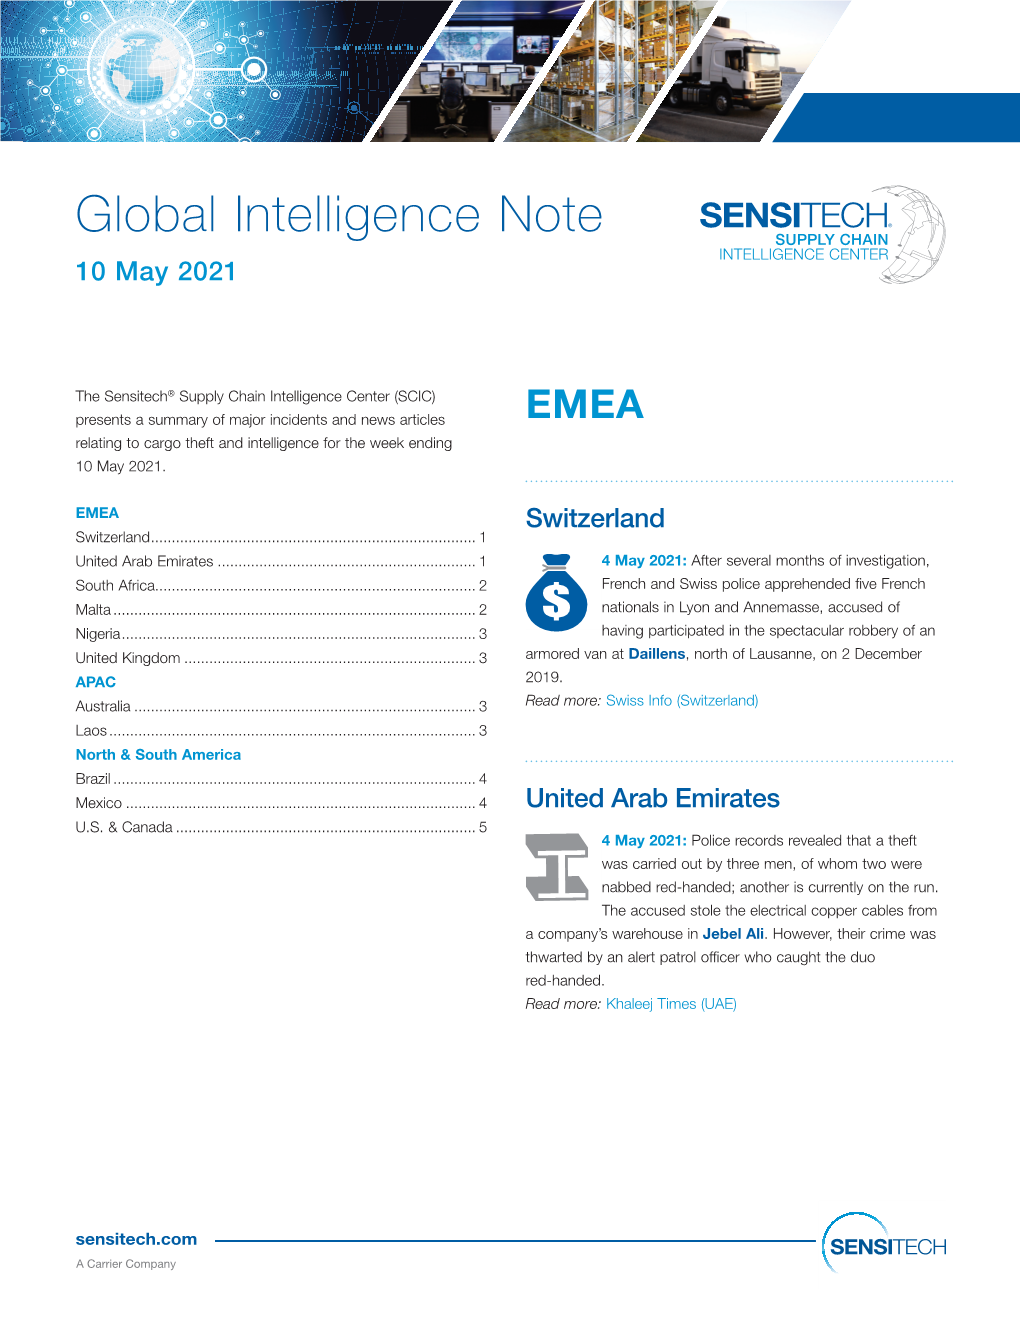 Sensitech SCIC Global Intelligence Note 10 May 2021